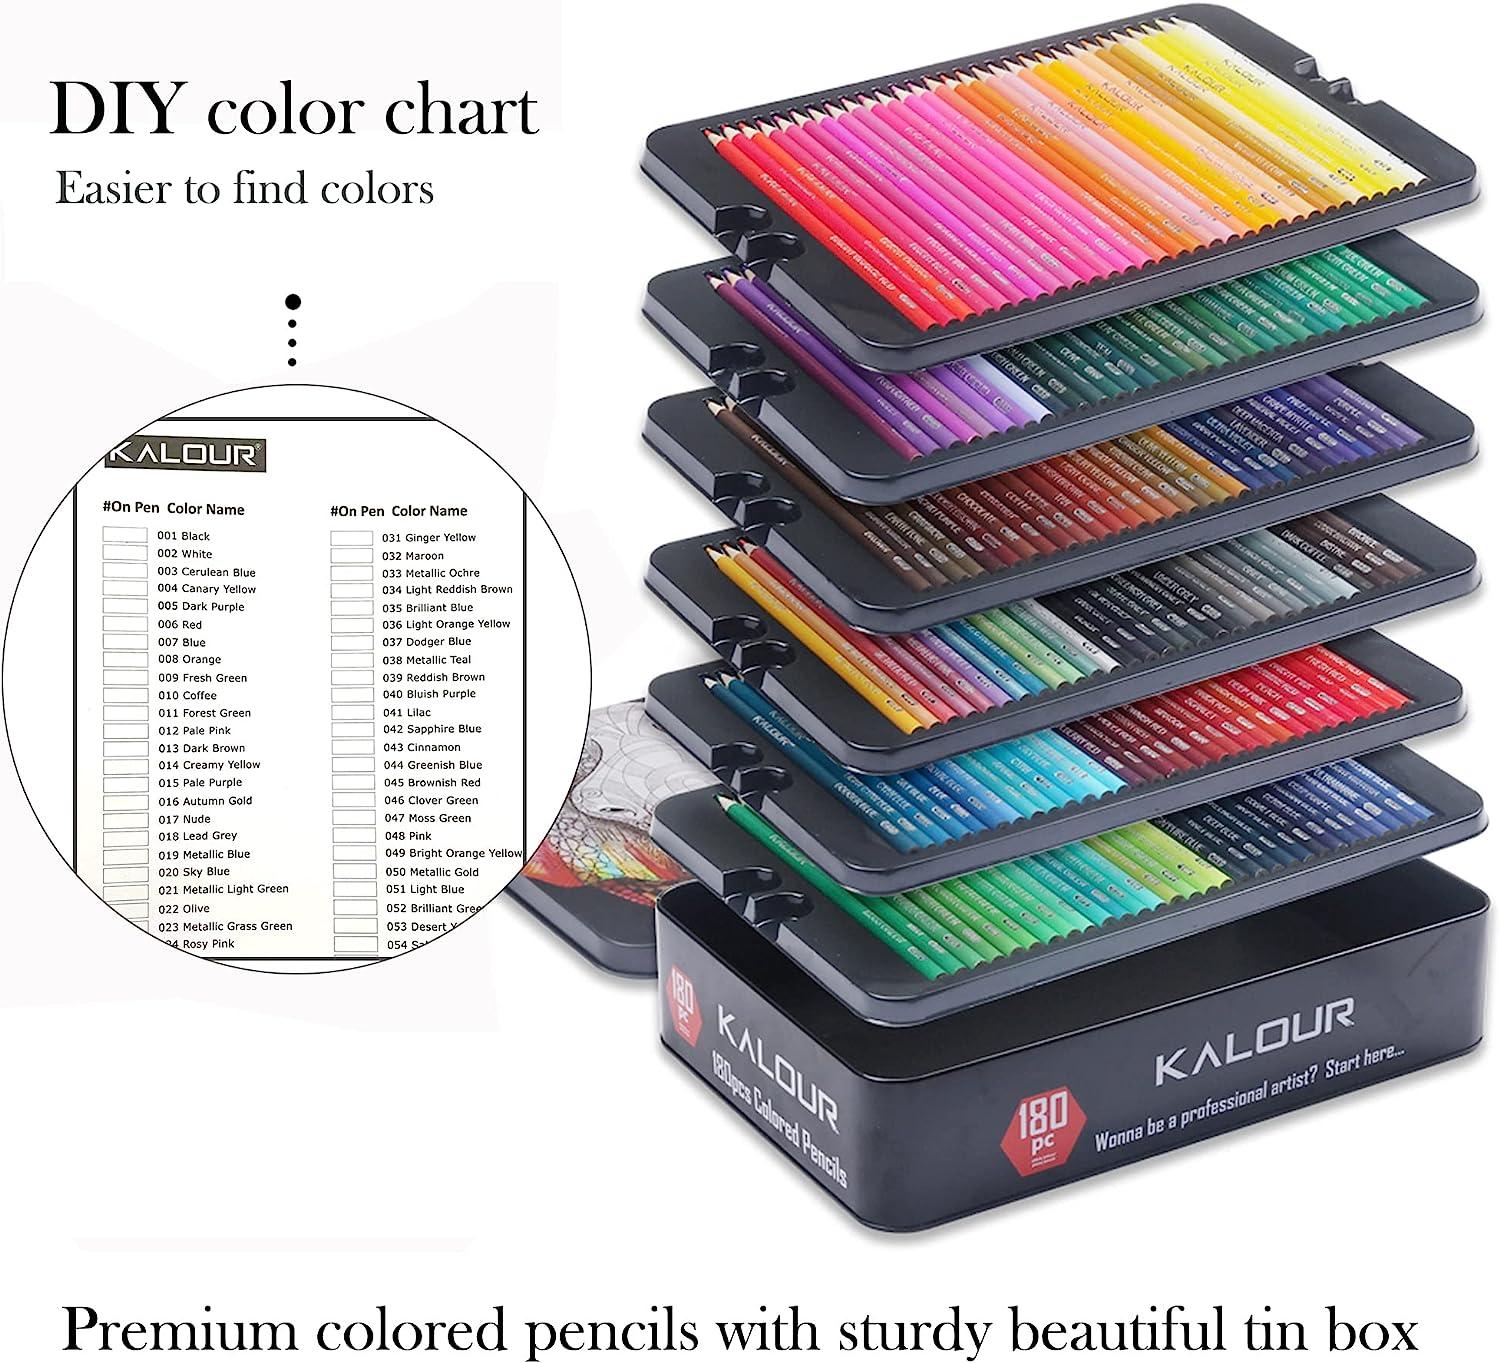 180 Colors Watercolour Pencils Set for Drawing Art Colored Pencils for  Sketching, Shading & Coloring